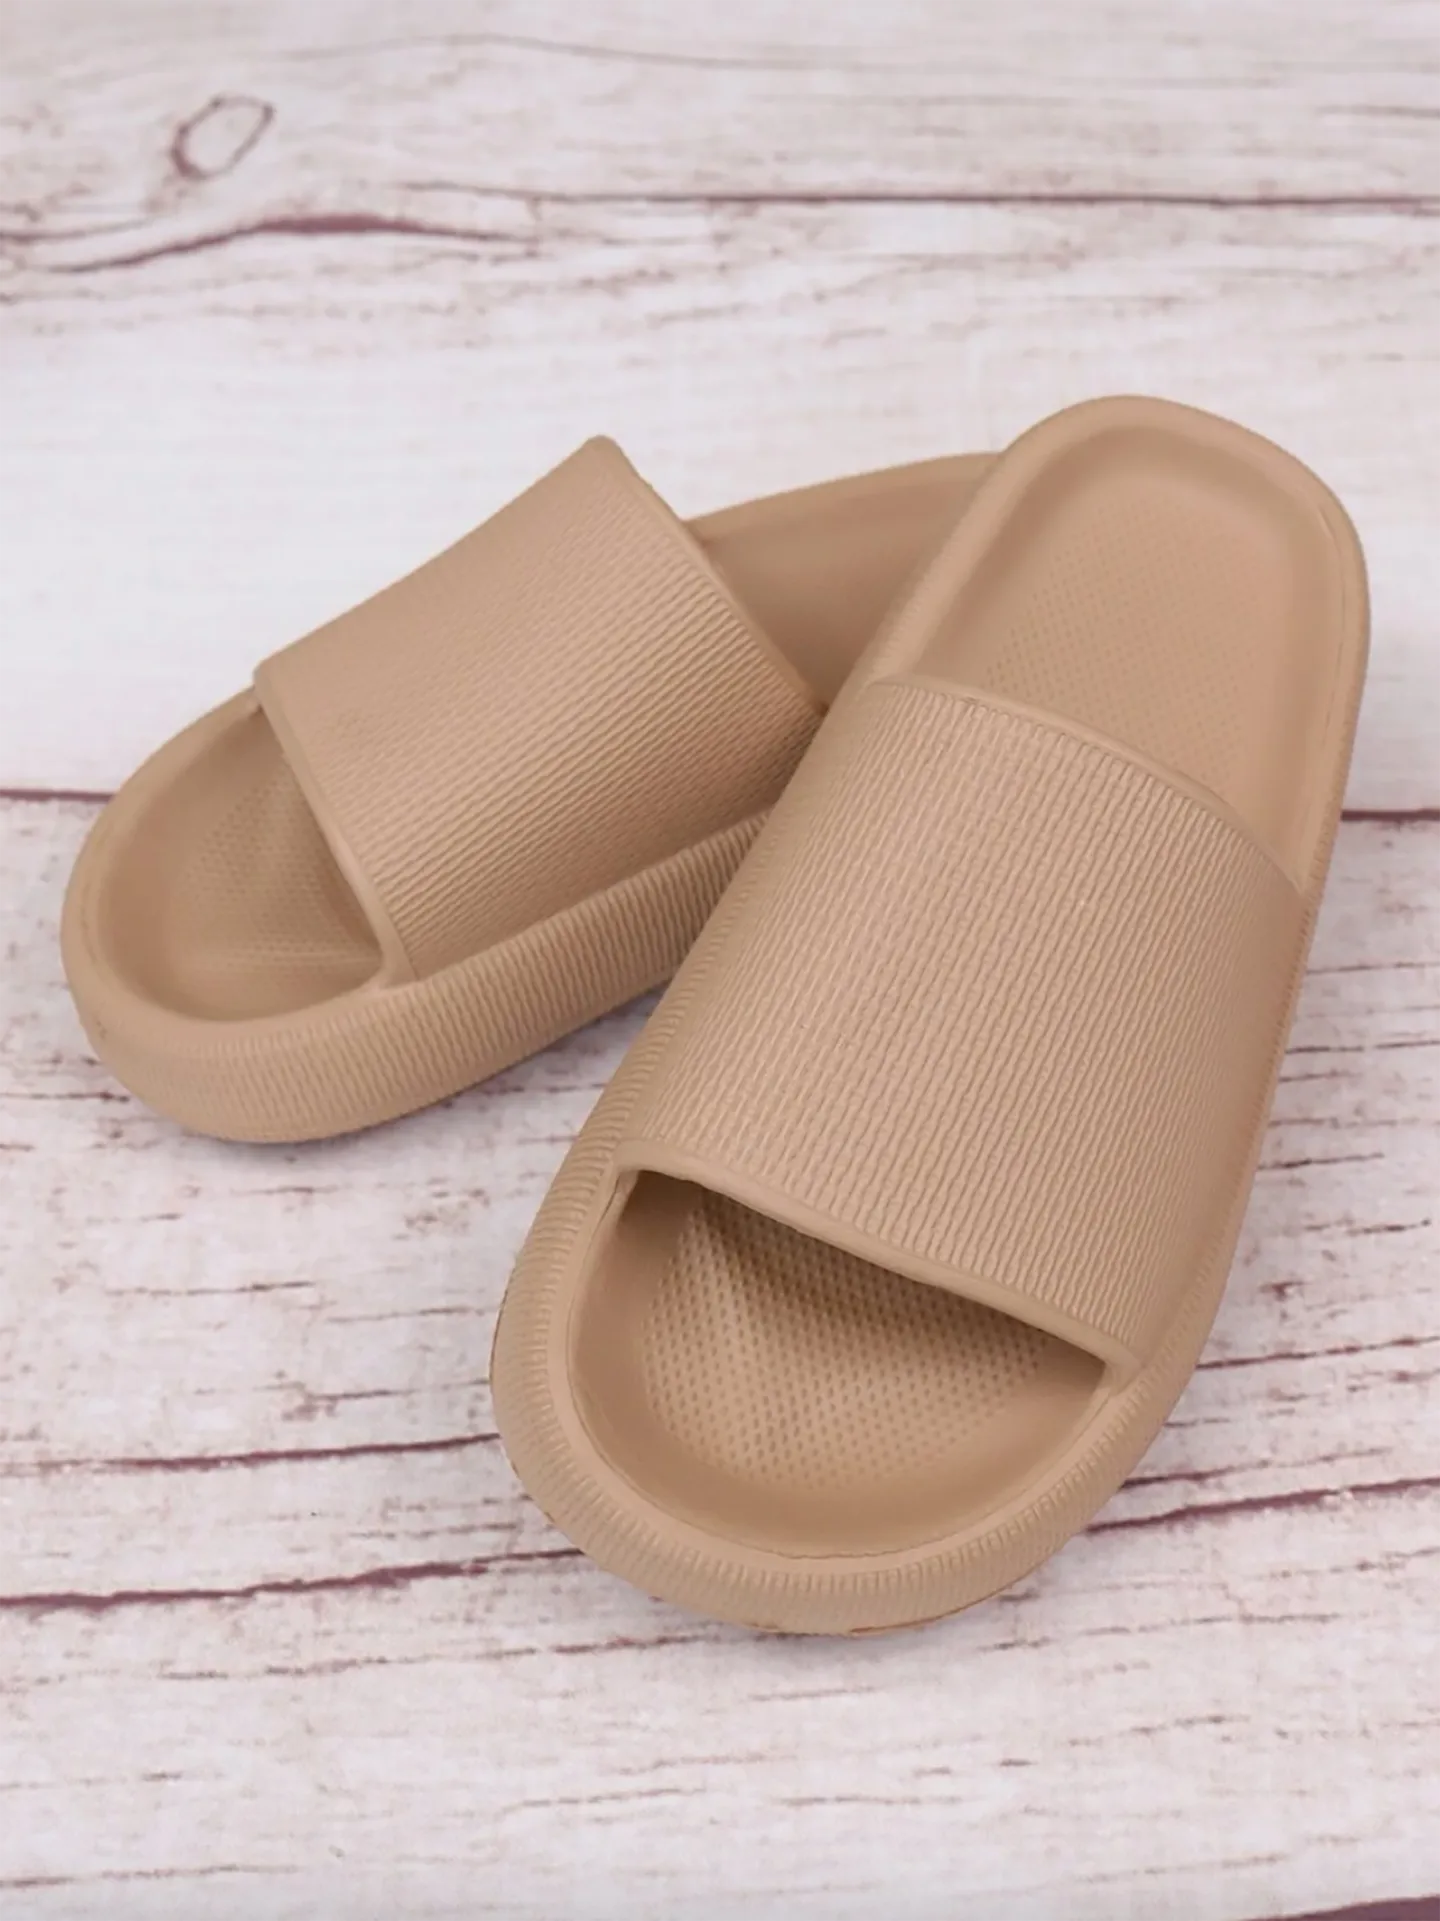 Top 7 Yeezy Slides dupes, by fashion blogger What The Fab